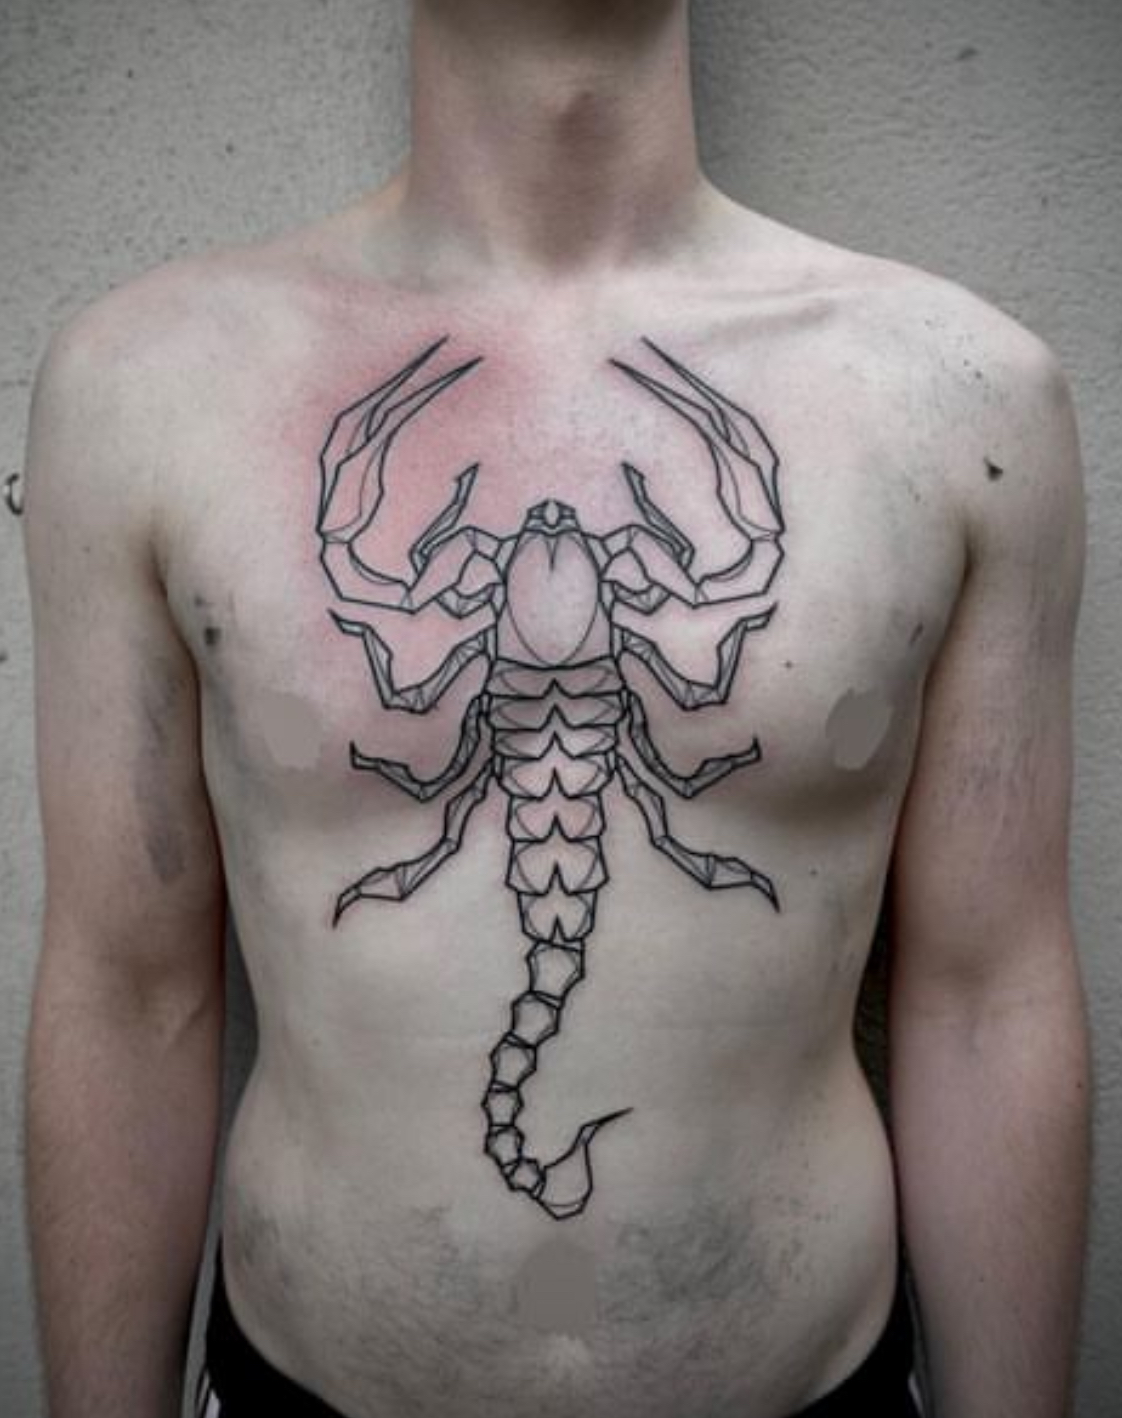 Skin Ink Tattoo - The order of the astrological signs is Aries, Taurus,  Gemini, Cancer, Leo, Virgo, Libra, Scorpio, Sagittarius, Capricorn,  Aquarius and Pisces. Each sector is named for a constellation it